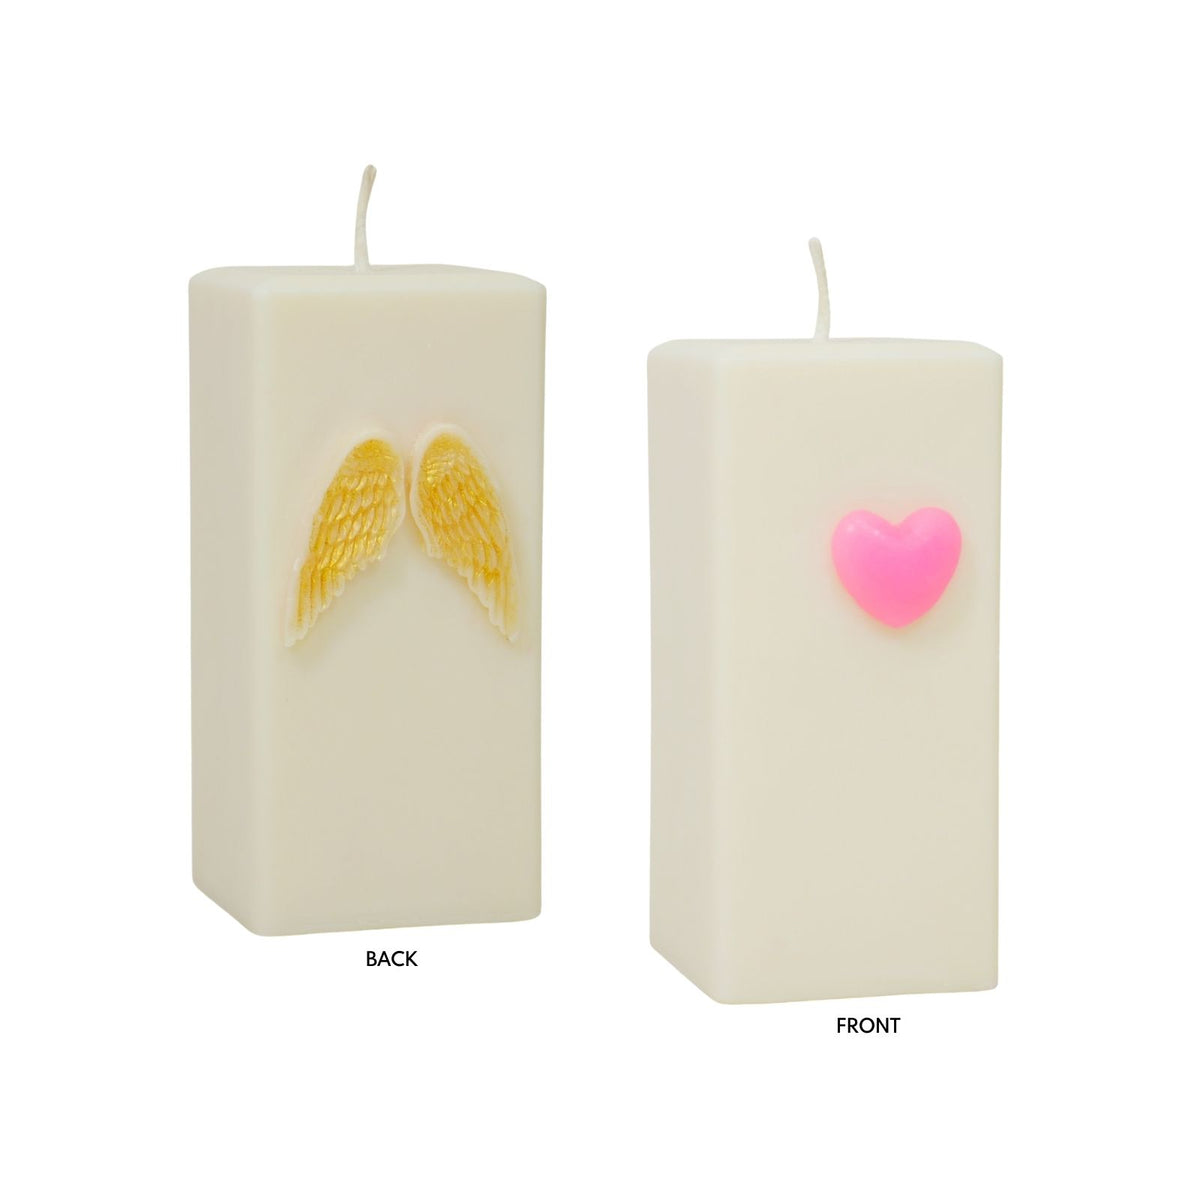 Cupid Candle